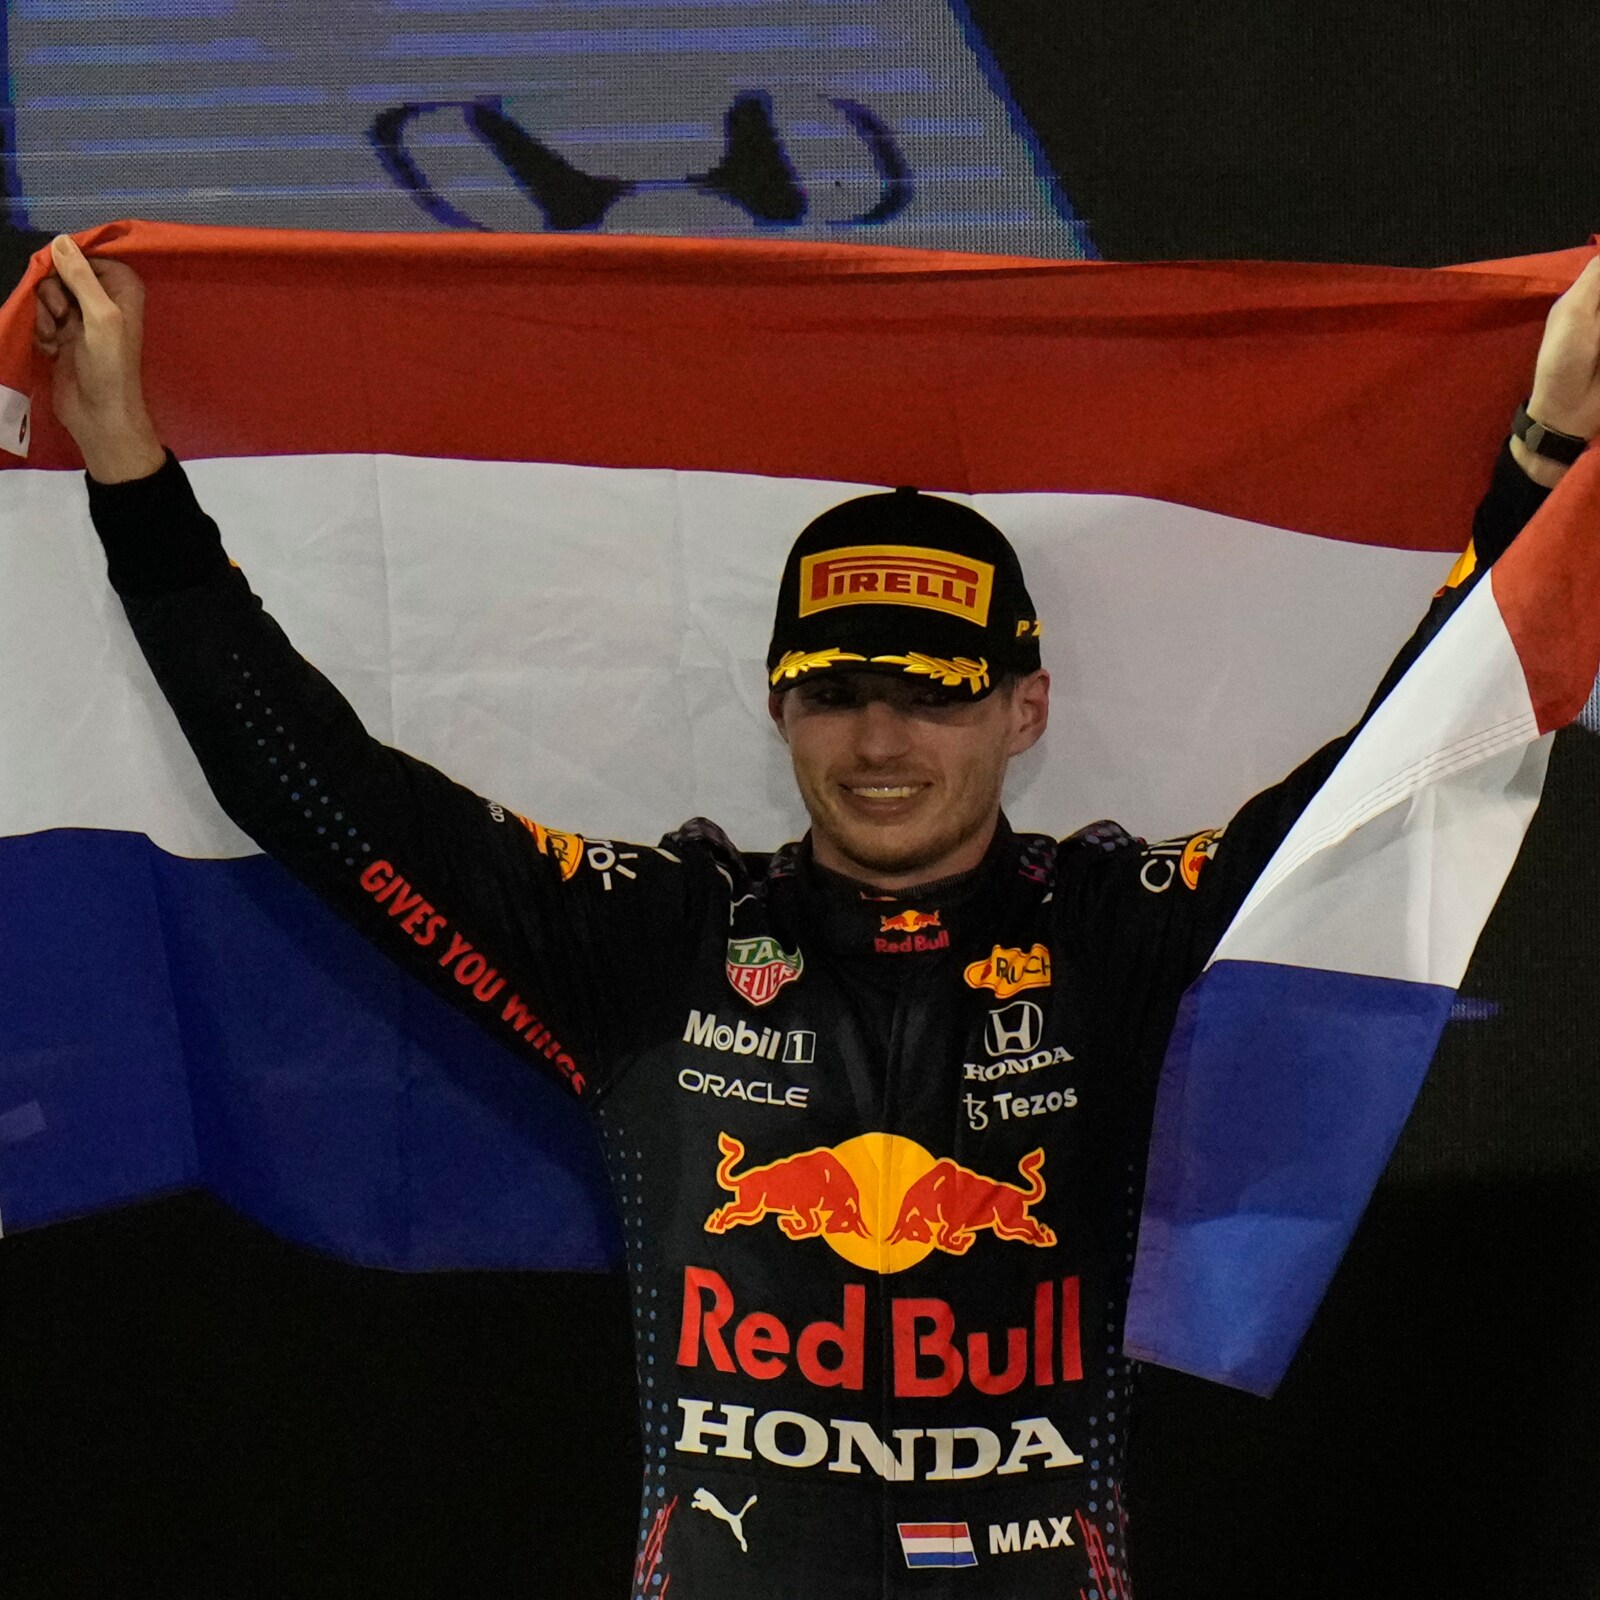 Cricket World Divided As Max Verstappen Seals Maiden Championship in Abu  Dhabi Grand Prix; Top Reactions - News18